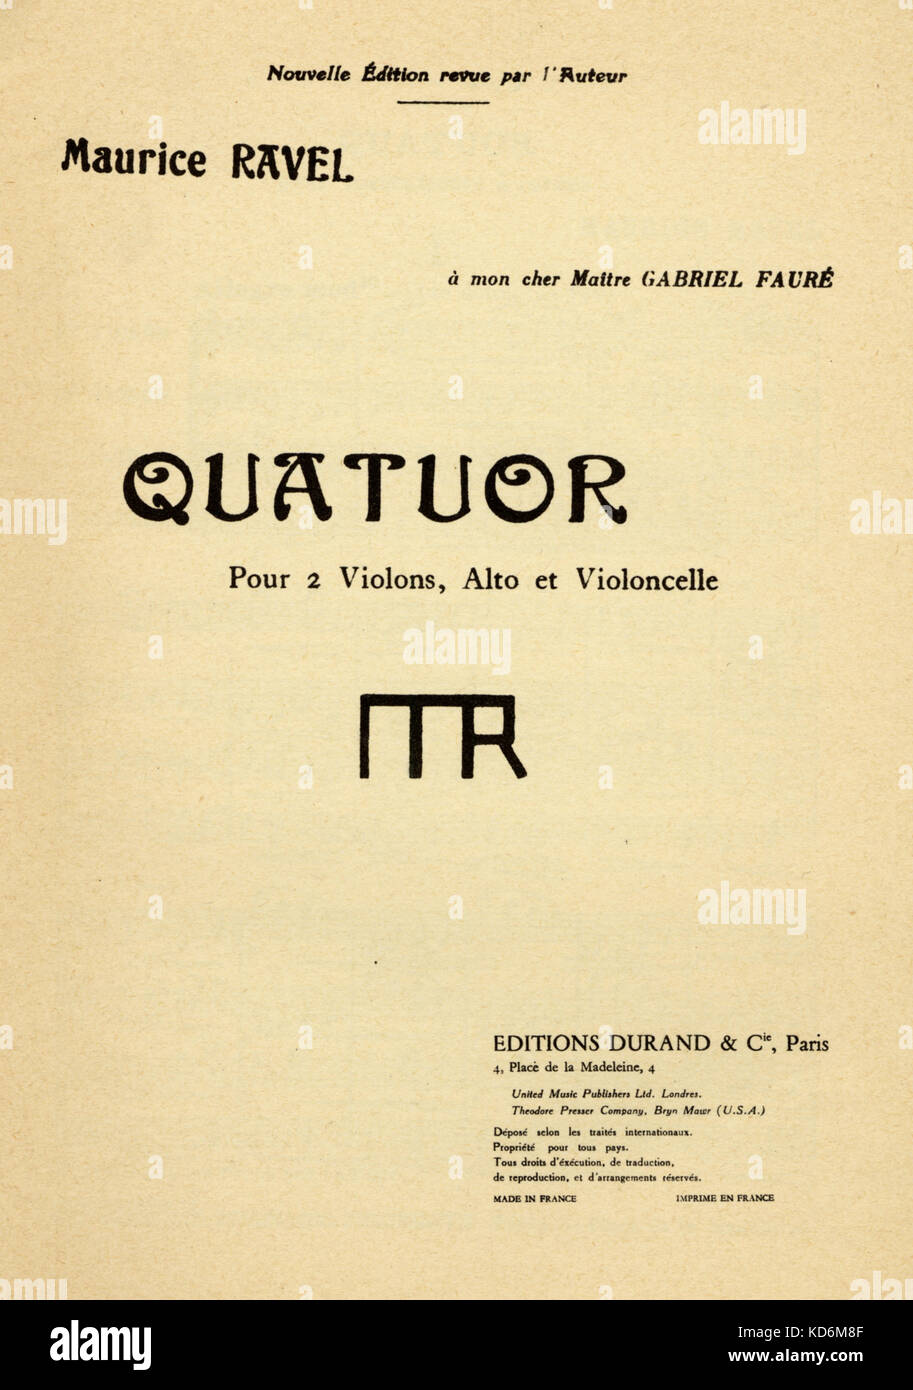 Maurice Ravel's 'Quatuor pour 2 violins, alto et violoncelle'.  Title page of score cover.  Published in Paris by  Durand, 1910. Dedicated to Gabriel Faure. Ravel: French composer,  7 March 1875 - 28 December 1937 Stock Photo